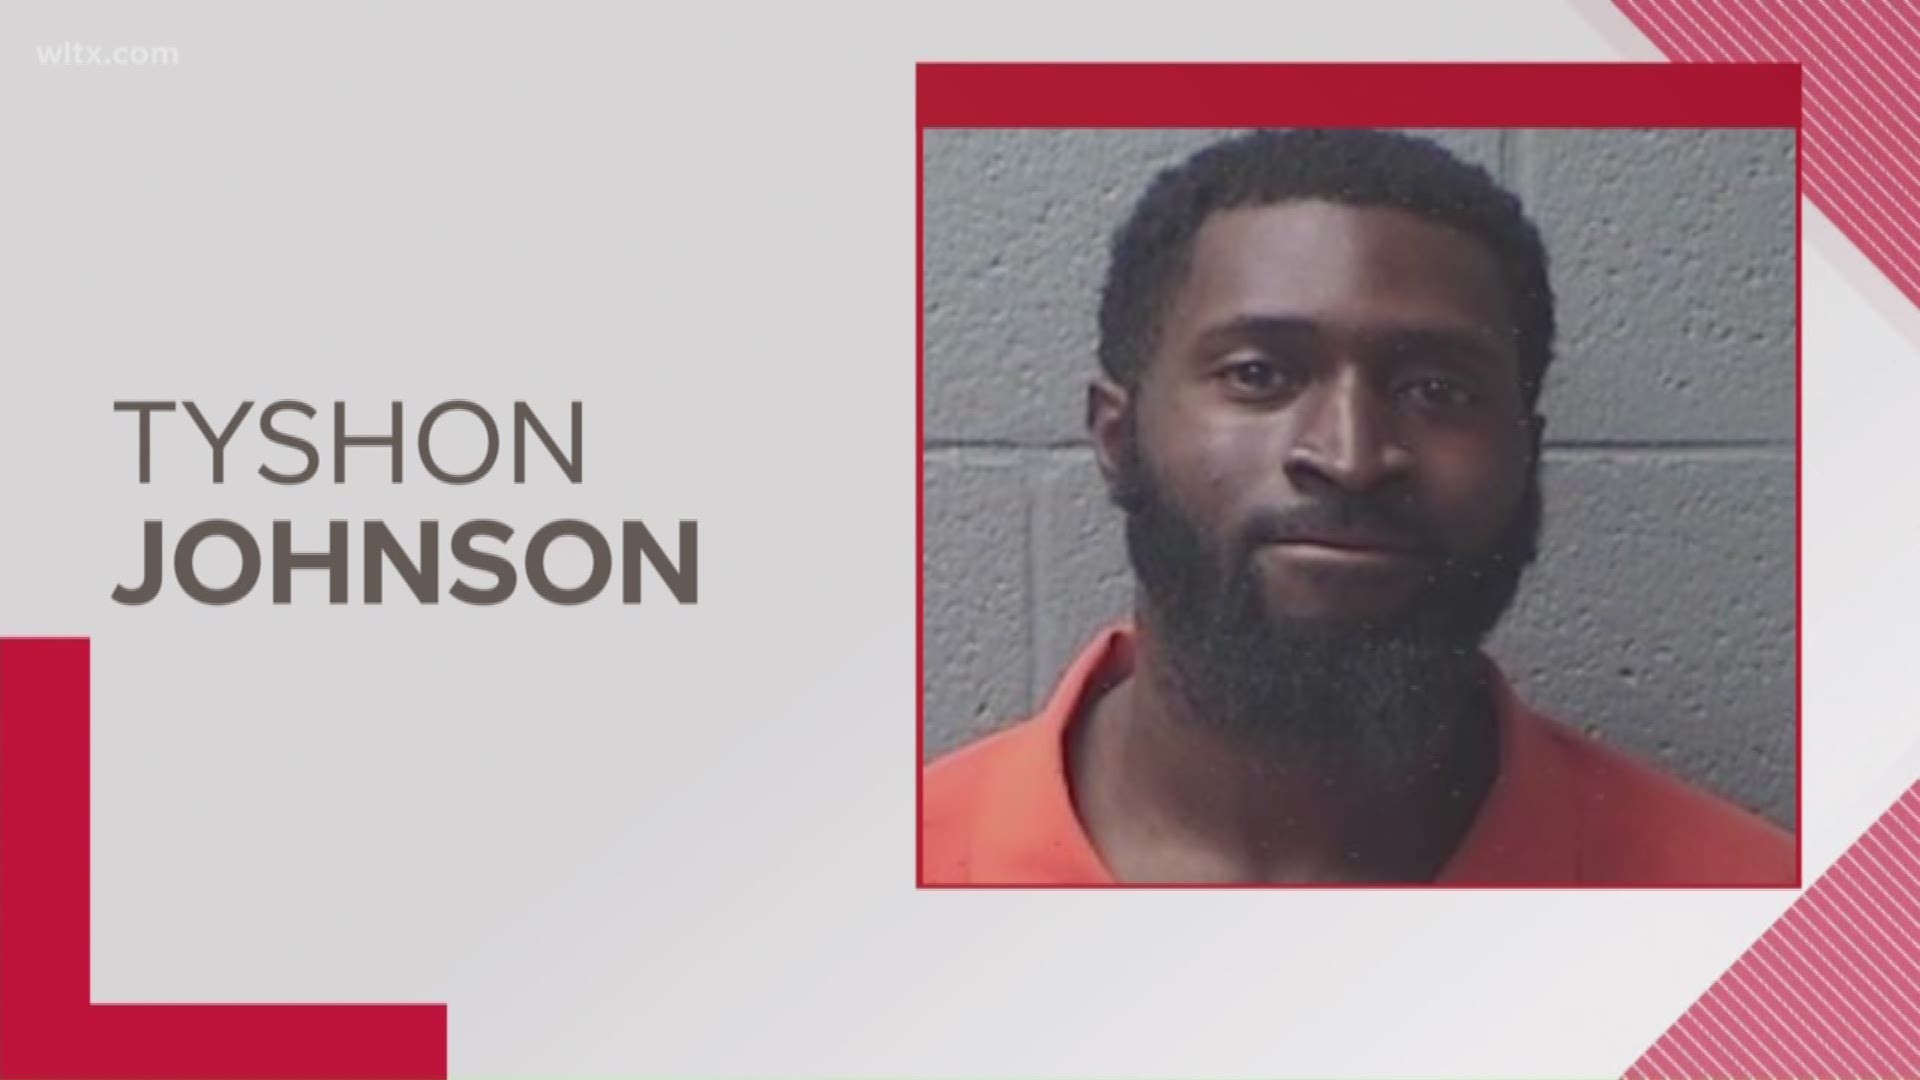 Deputies say 27-year-old Tyshon Johnson, who is facing a murder charge, was apprehended Tuesday afternoon.